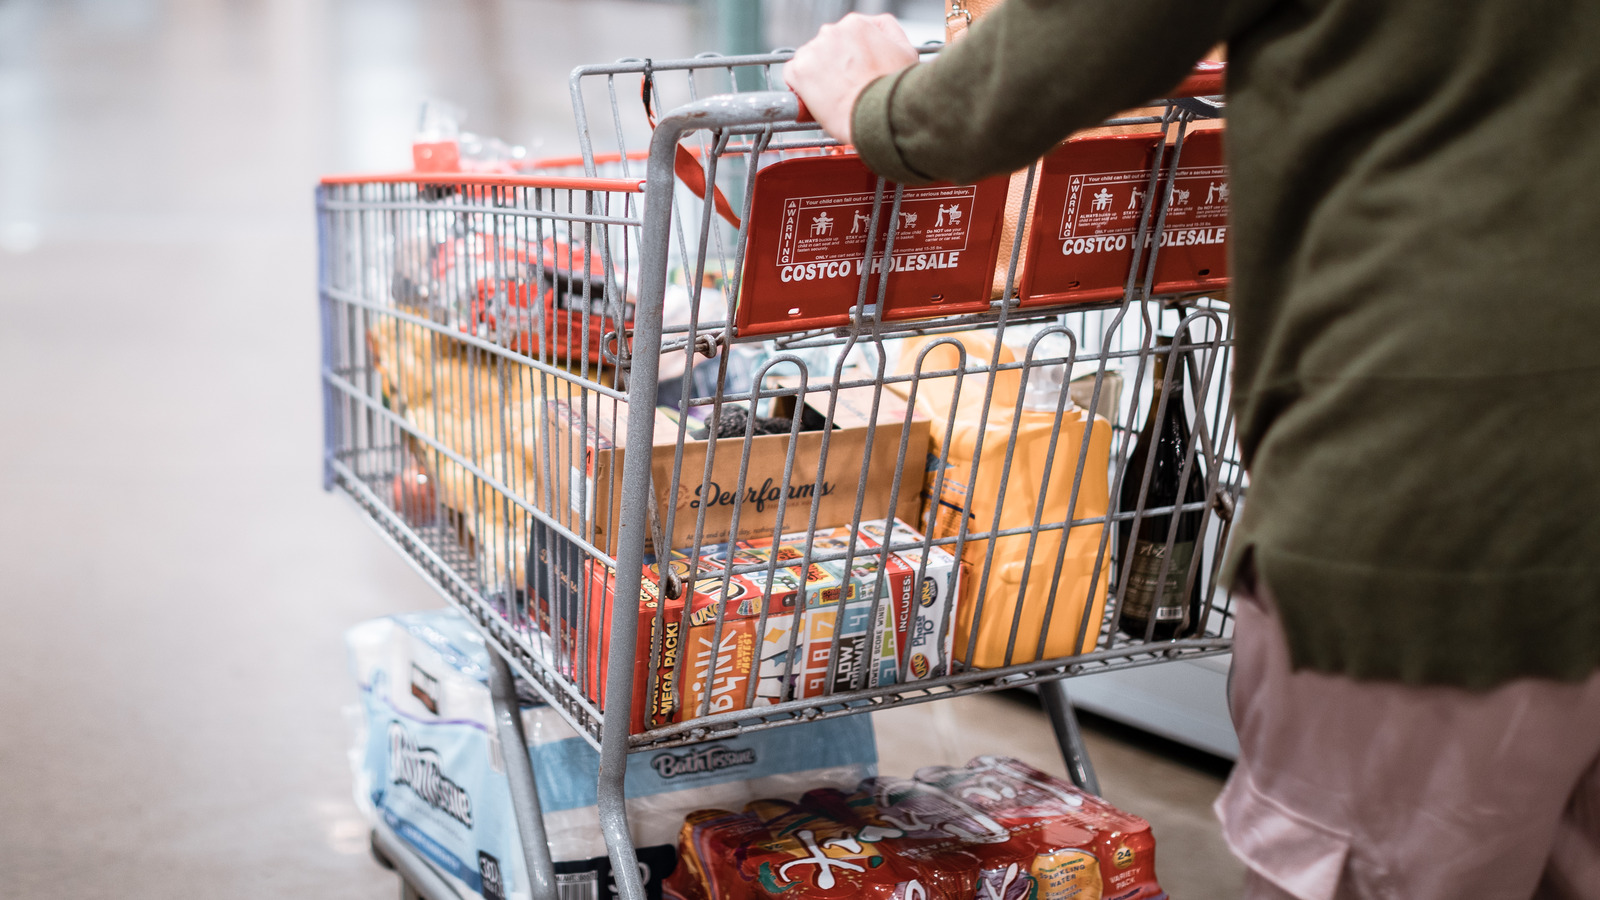 Costco Shoppers Were Stunned By This Executive Rebate